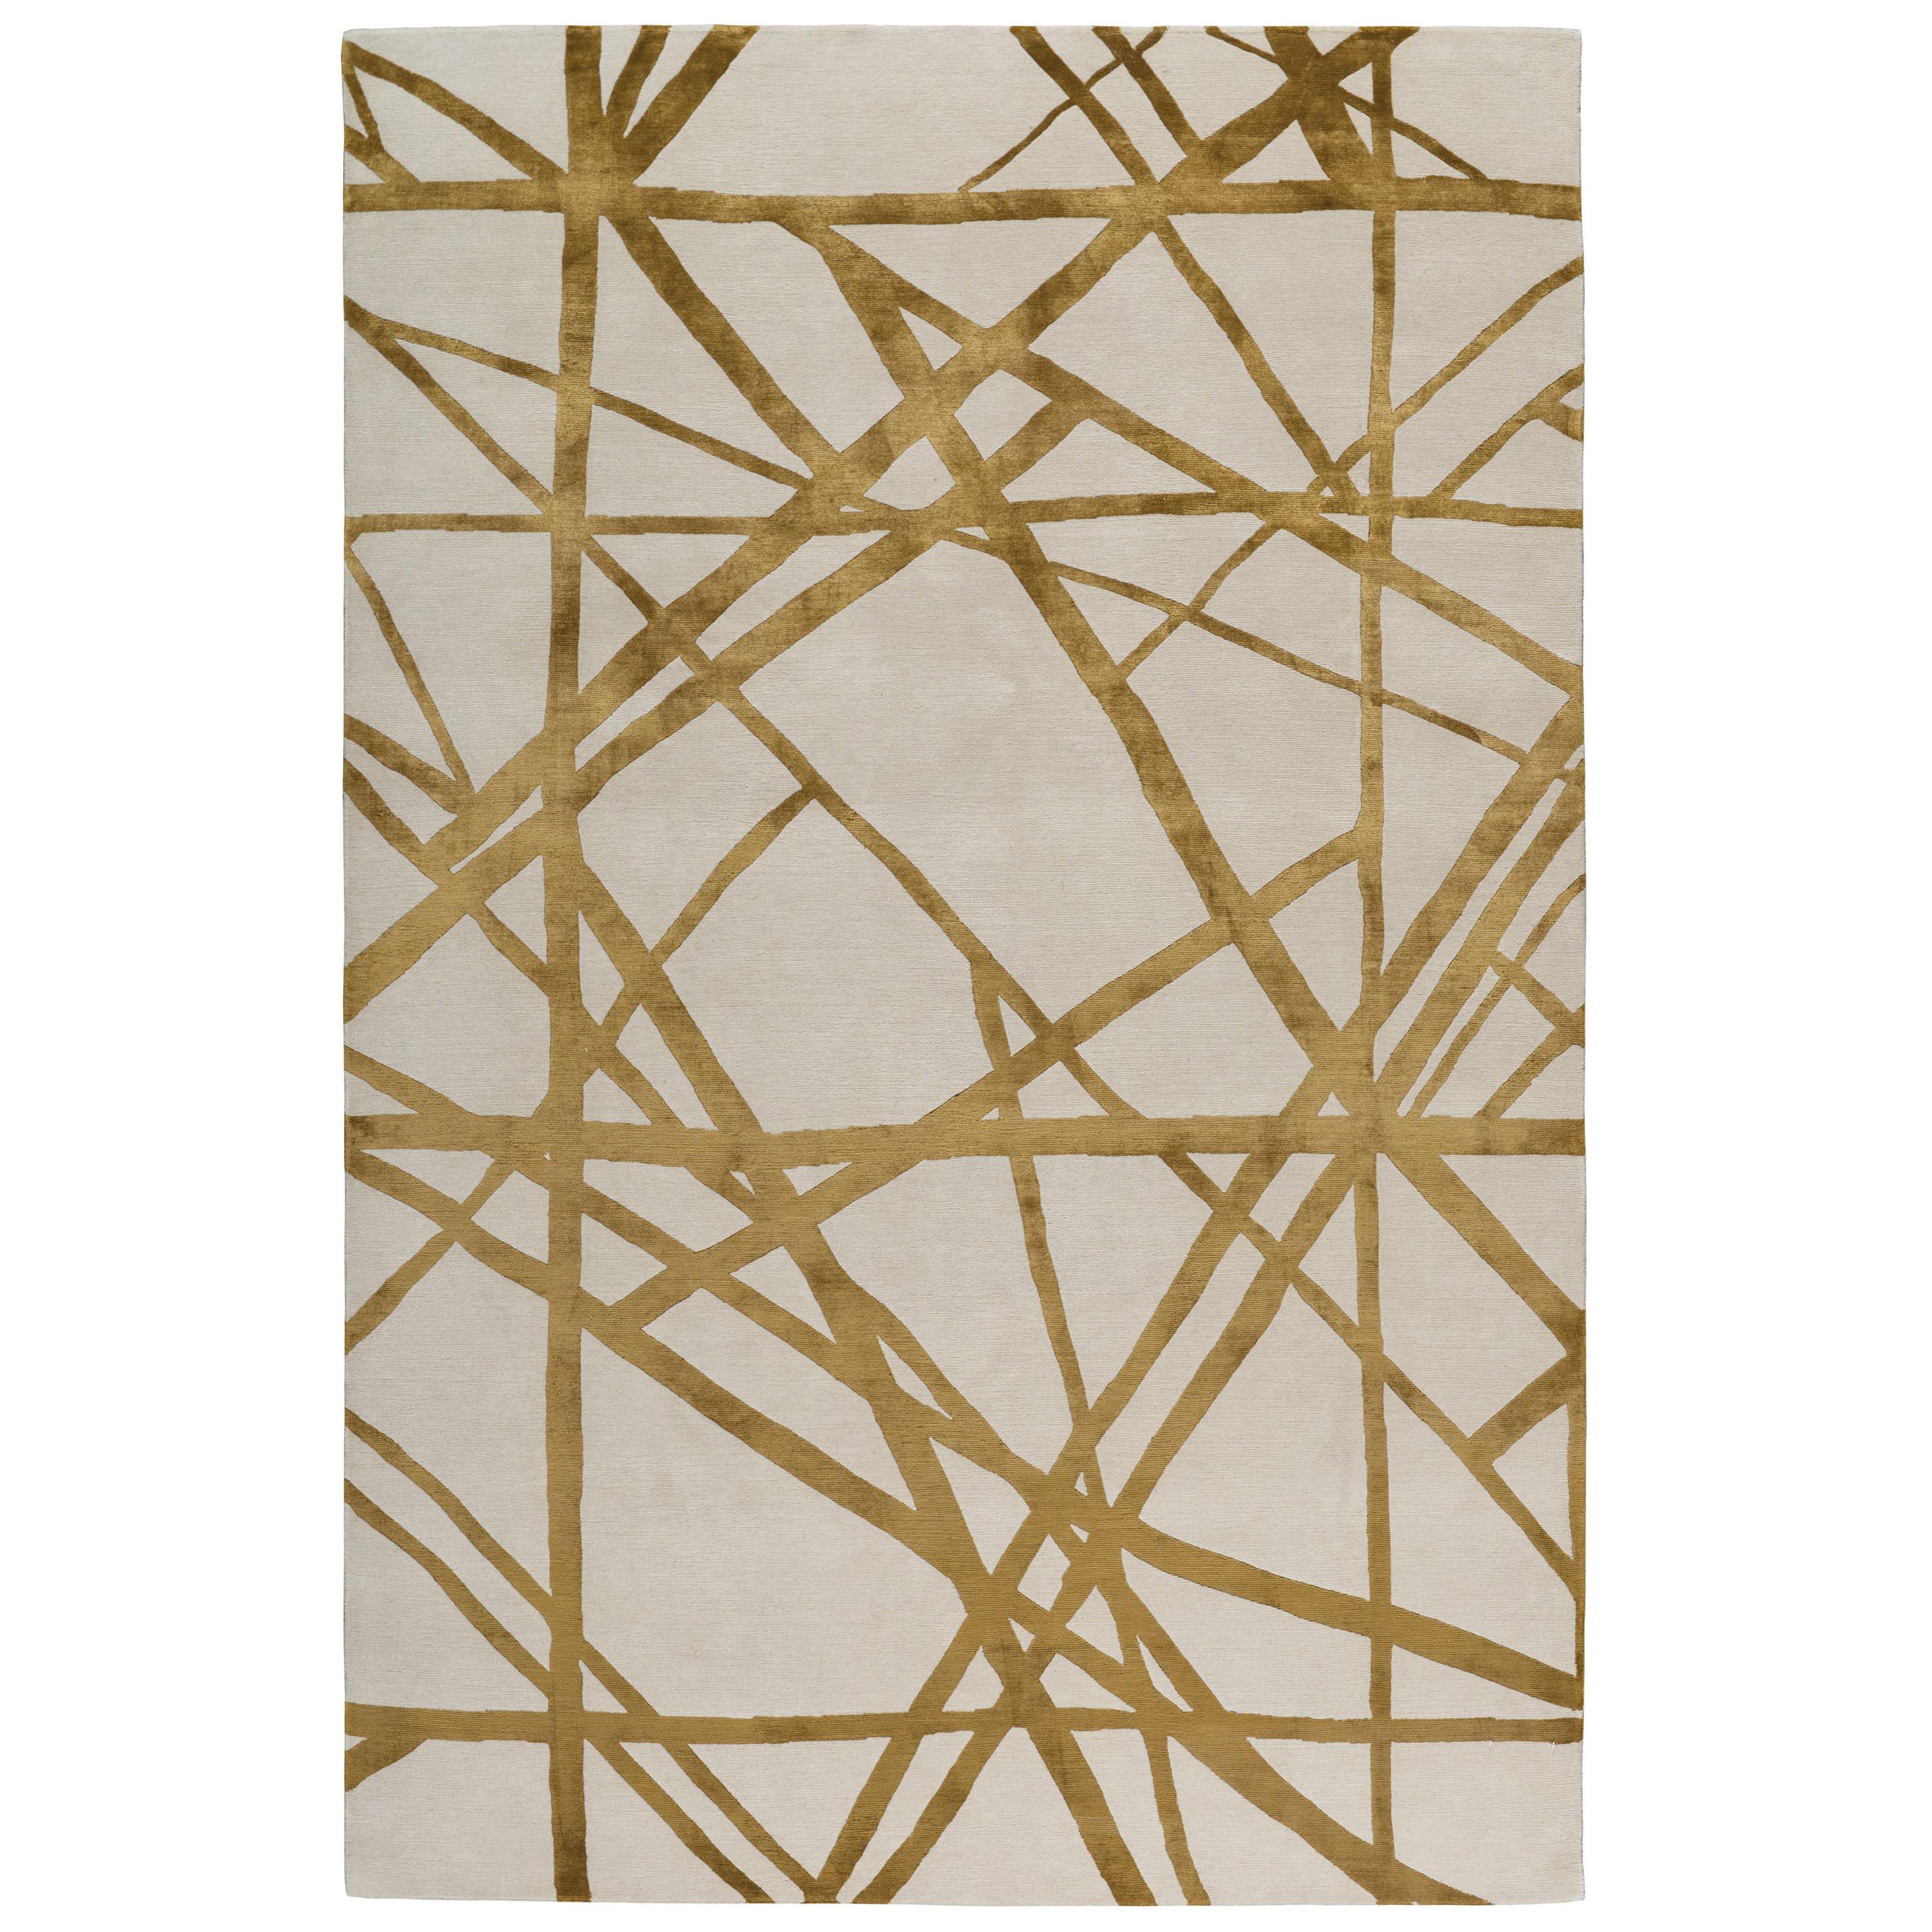 Channels Copper Hand Knotted 10x8 Rug in Wool and Silk by Kelly Wearstler